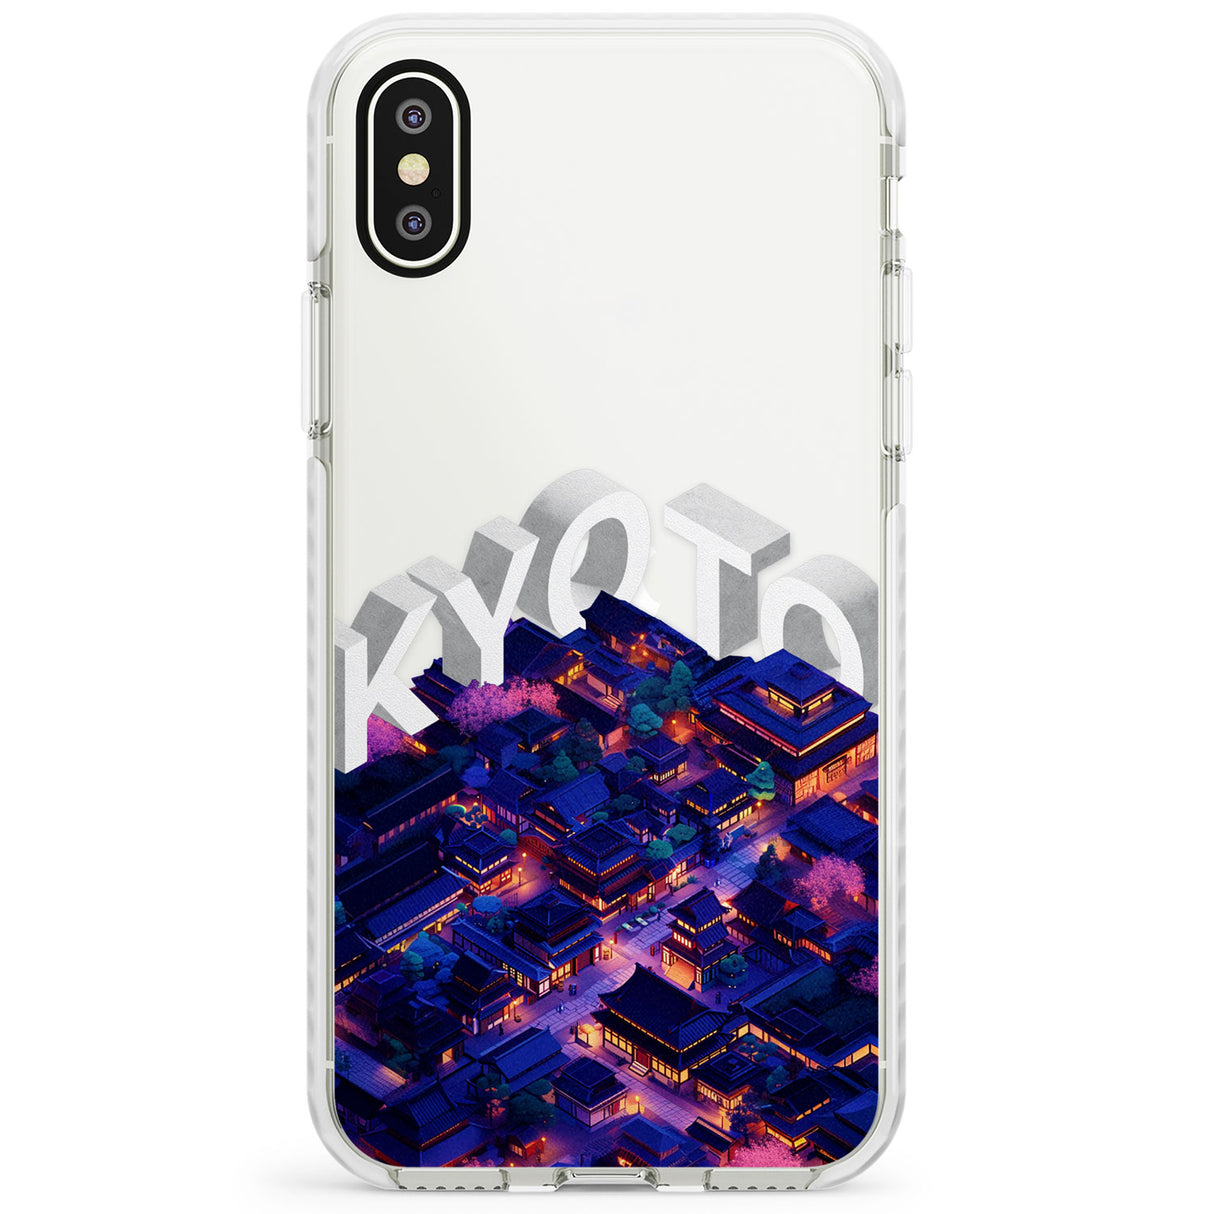 Kyoto Impact Phone Case for iPhone X XS Max XR